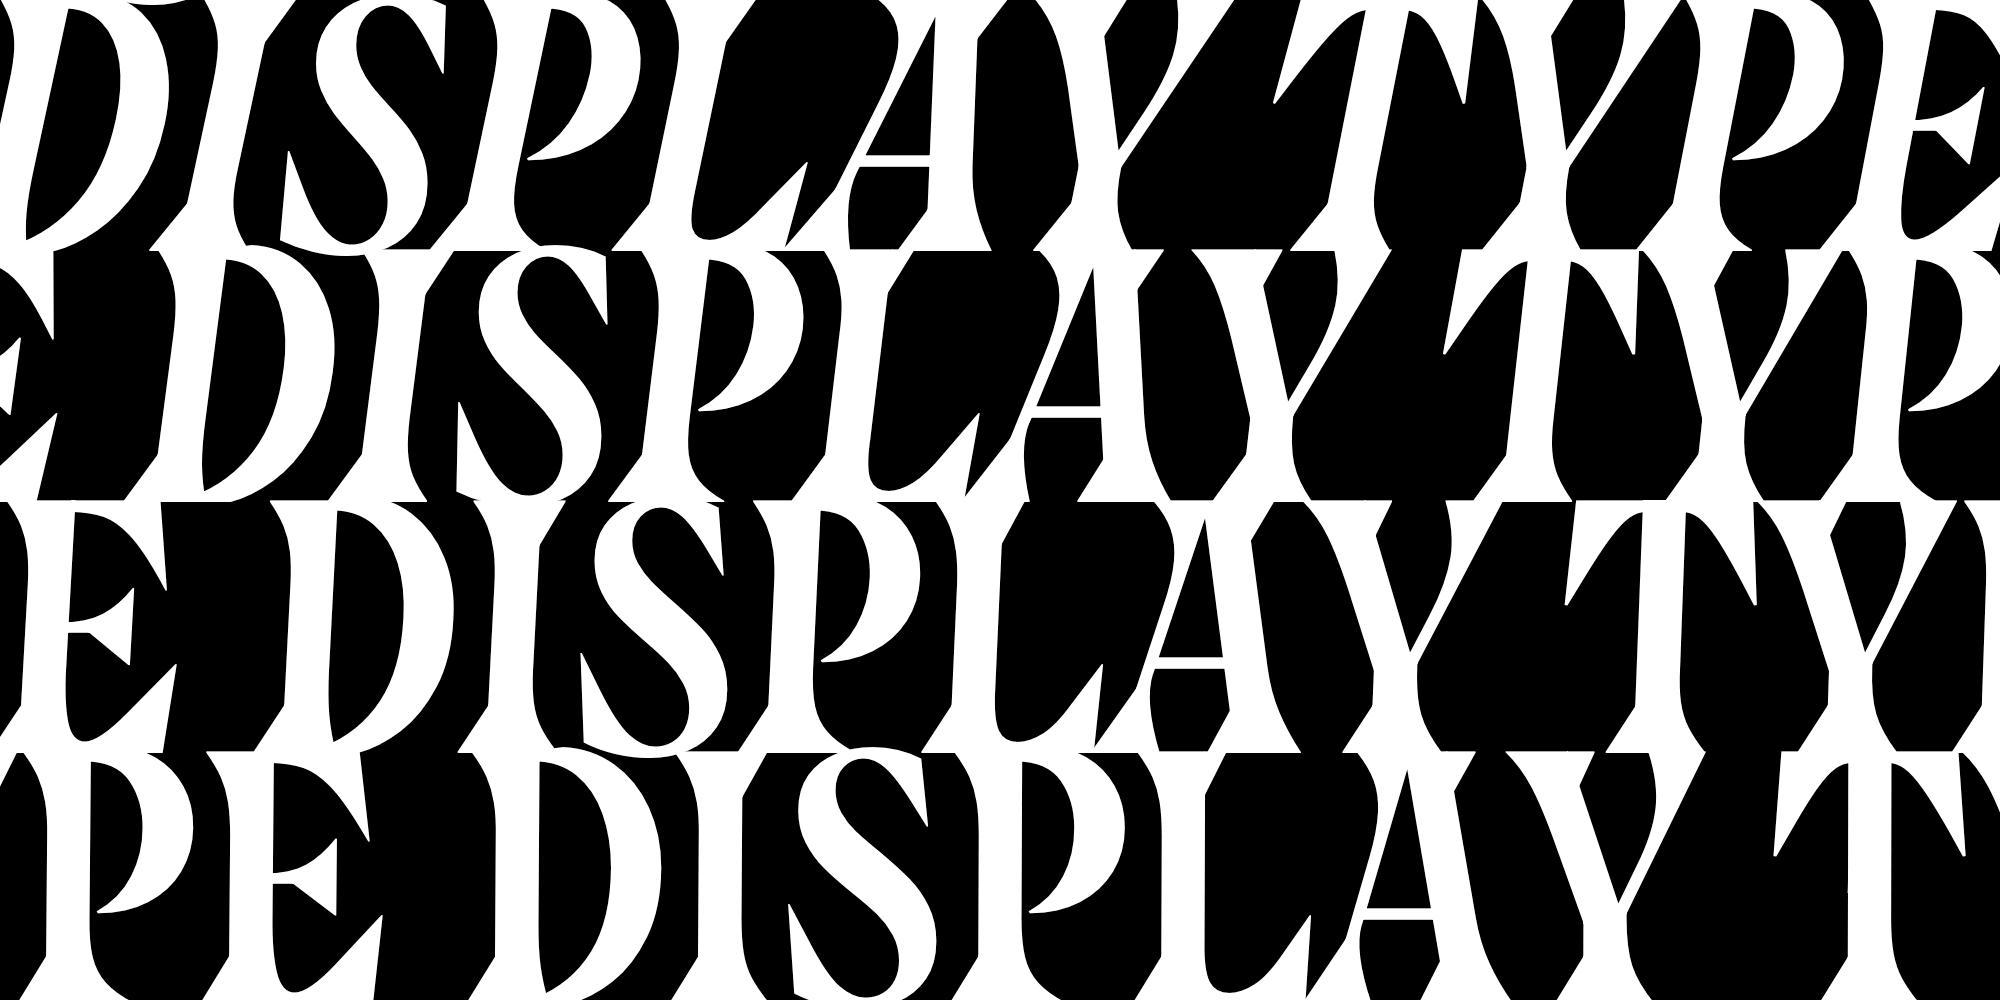 The words "Display Type" are rendered on white letters over a black background.